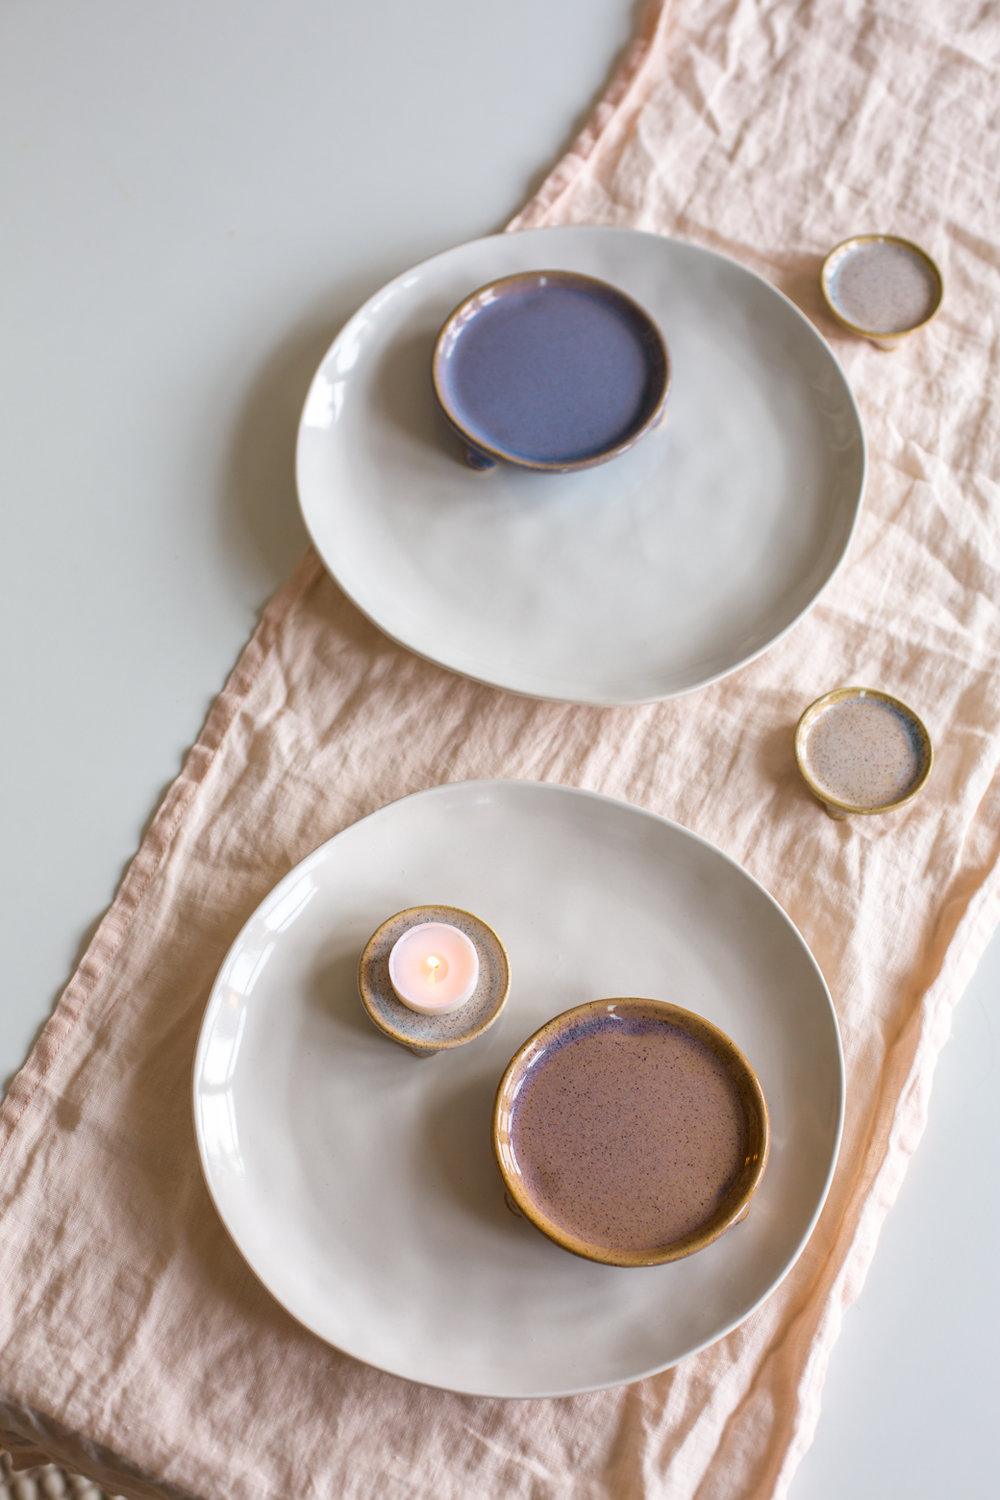 The little pottery pieces are perfect for tapas a dips or for tealights and pillar candles.